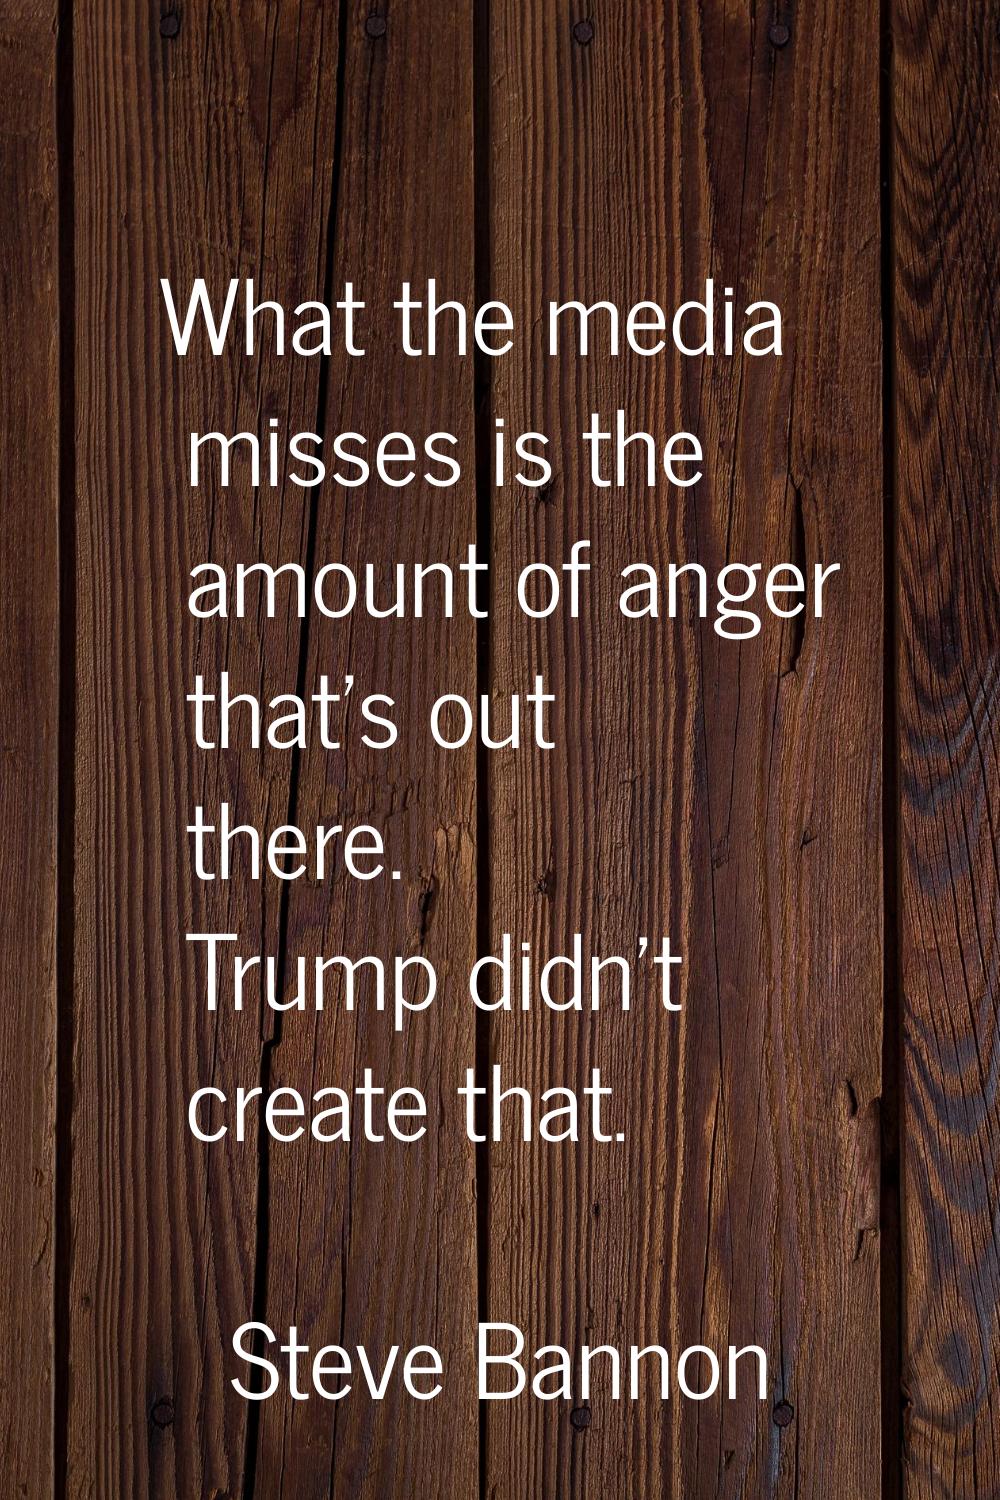 What the media misses is the amount of anger that's out there. Trump didn't create that.